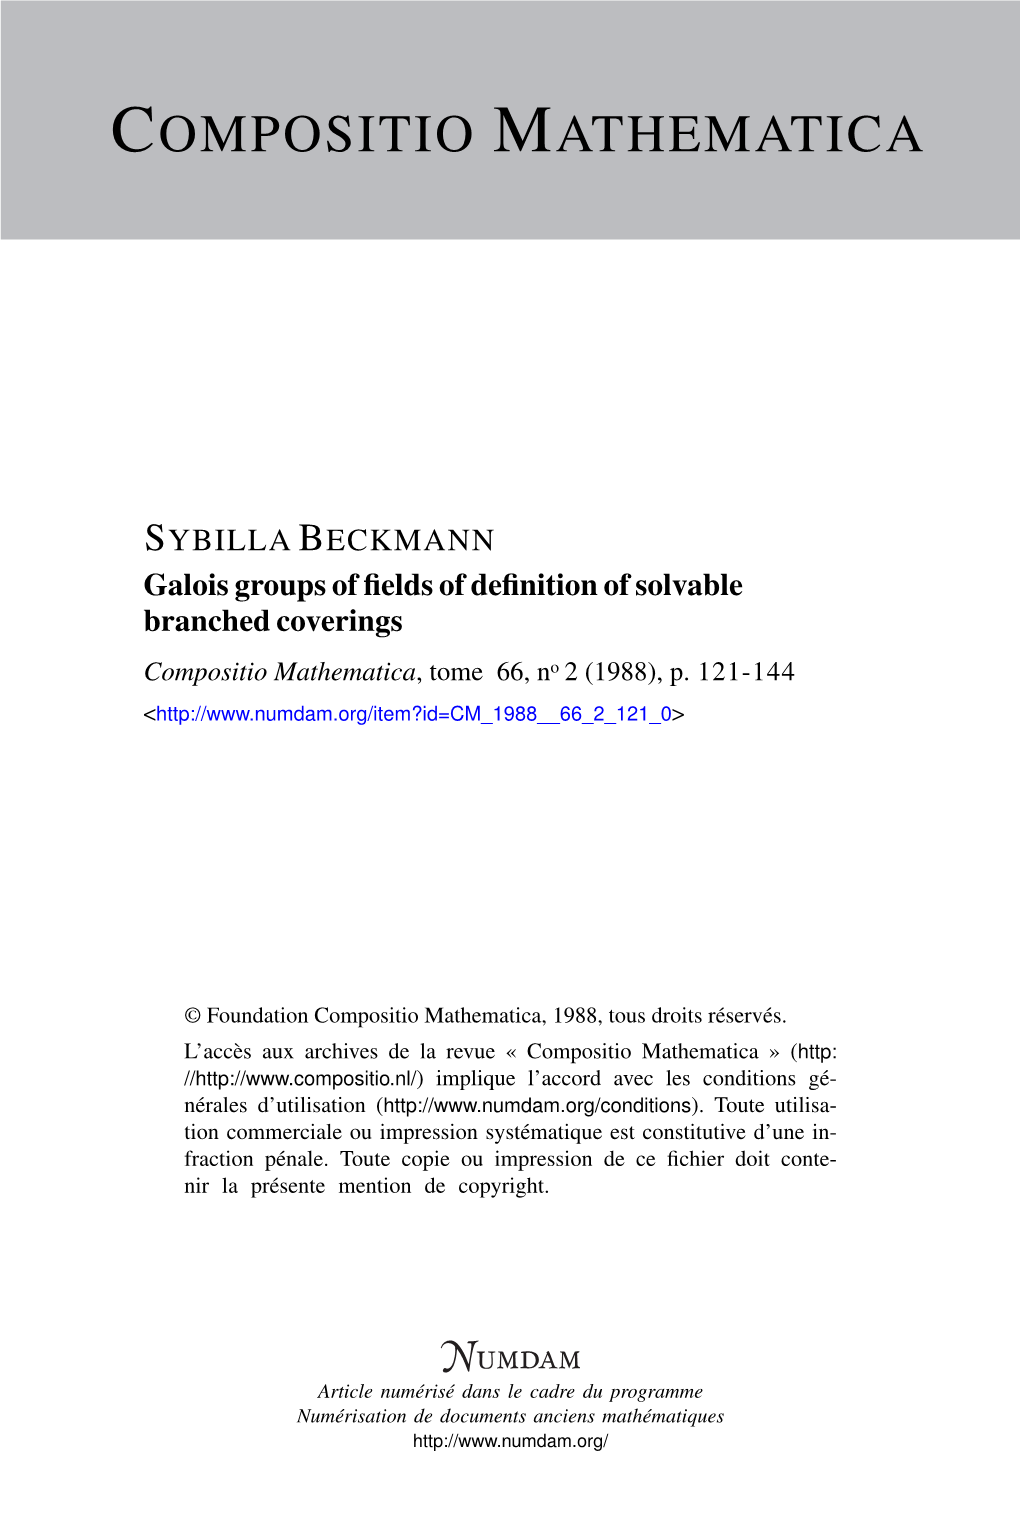 Galois Groups of Fields of Definition of Solvable Branched Coverings